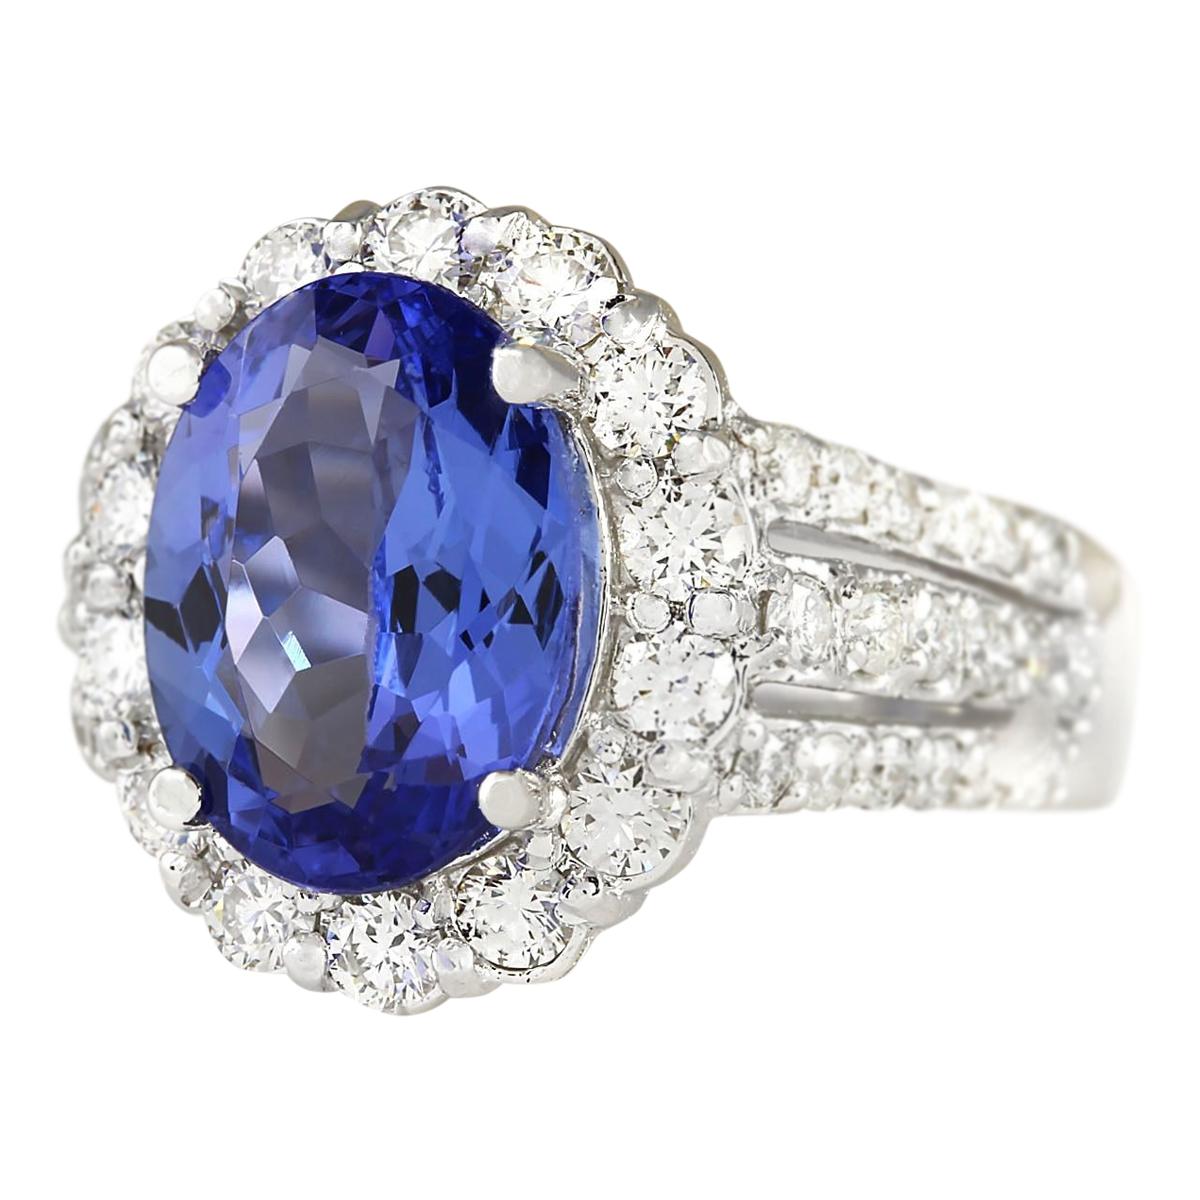 Introducing our stunning 5.42 Carat Tanzanite 14 Karat White Gold Diamond Ring. Crafted from stamped 14K White Gold, this ring weighs 8.6 grams, ensuring both quality and durability. The focal point is a captivating Tanzanite gemstone weighing 3.77